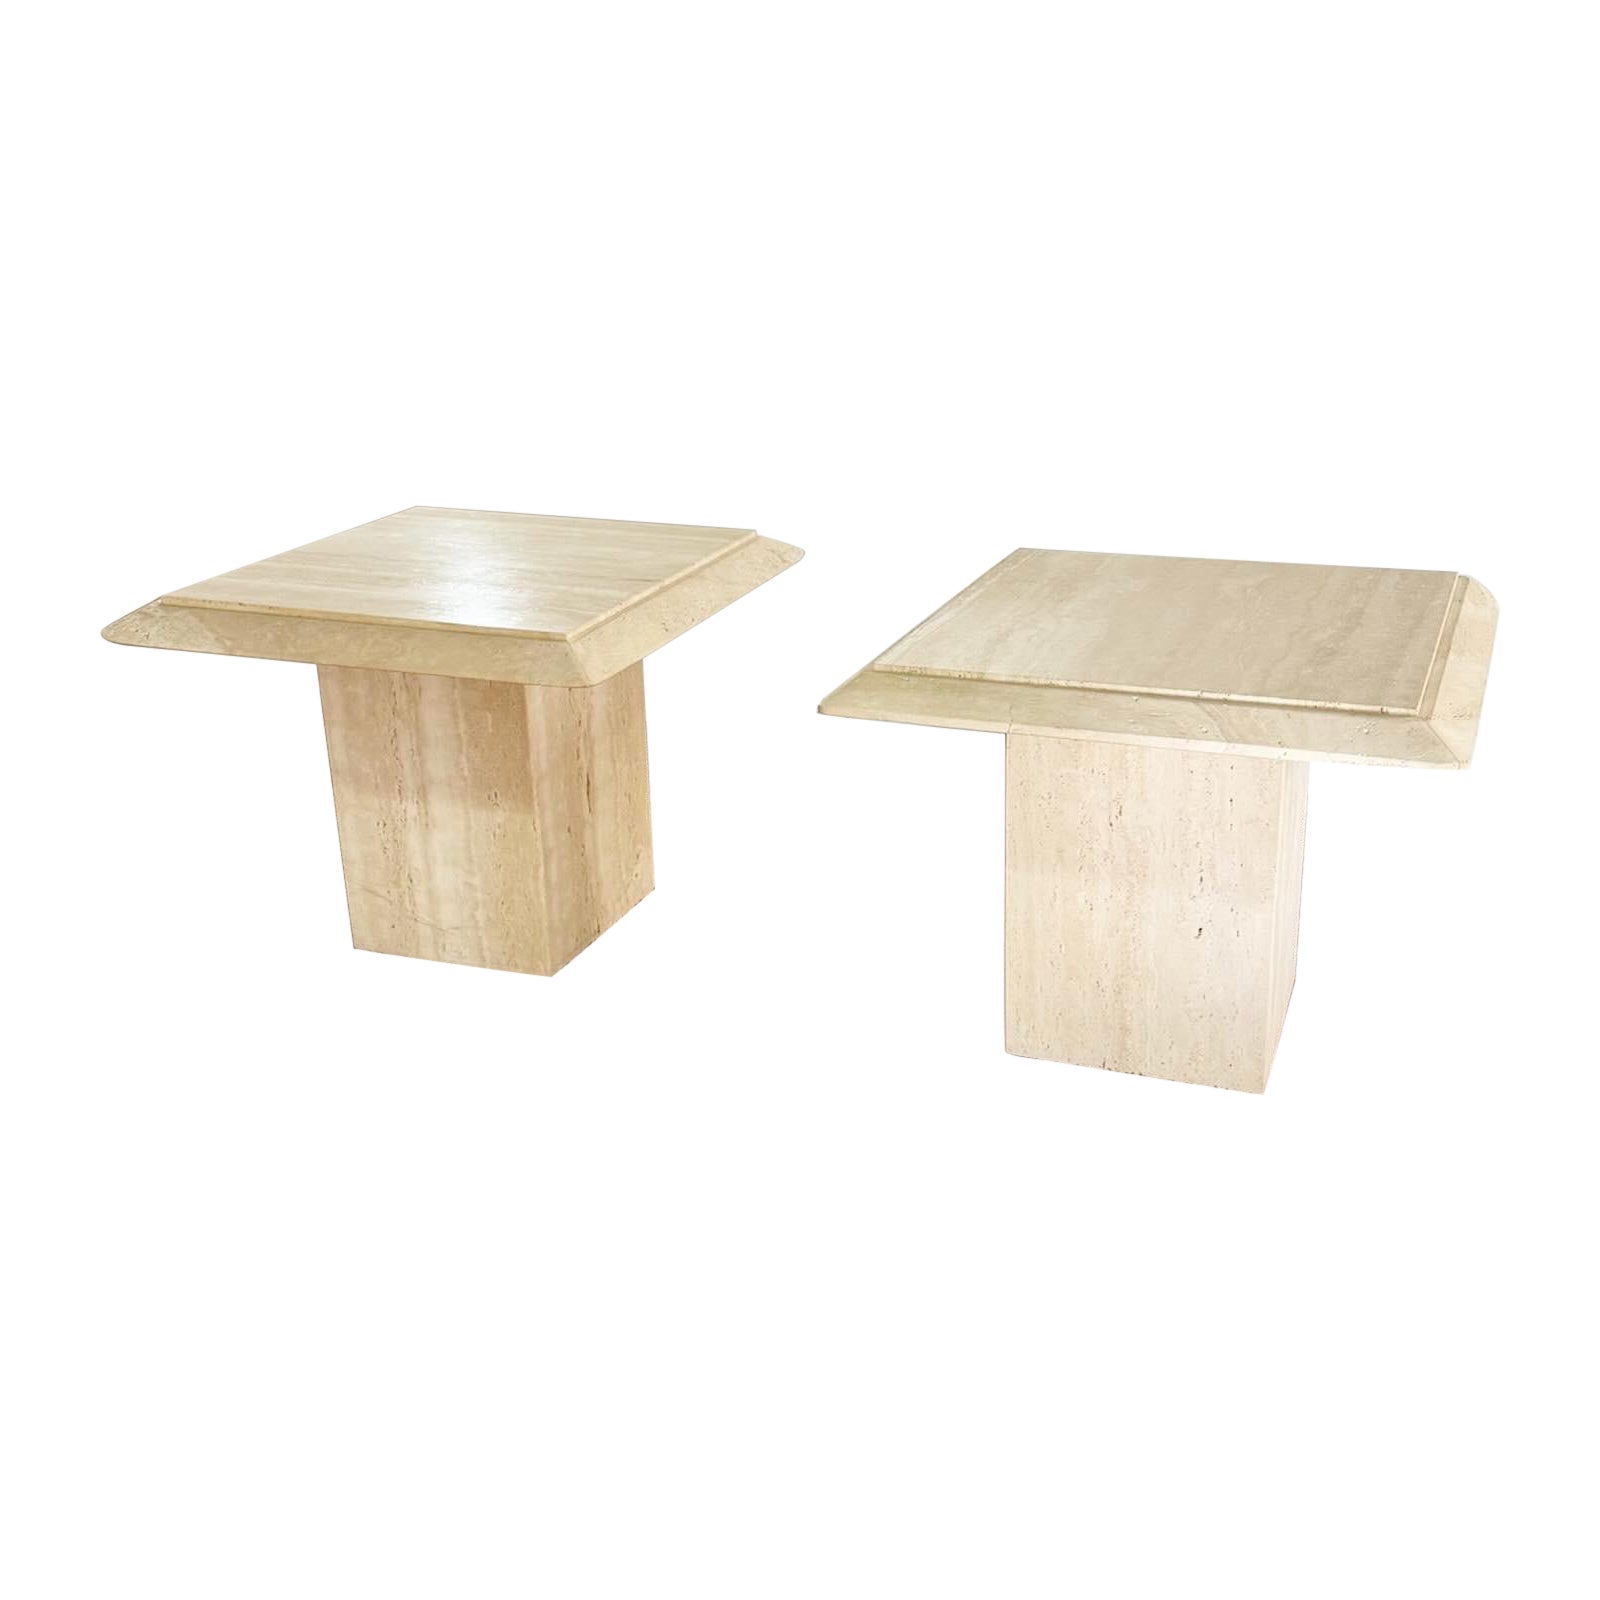 Italian Travertine Square Beveled Top Side Tables – a Pair